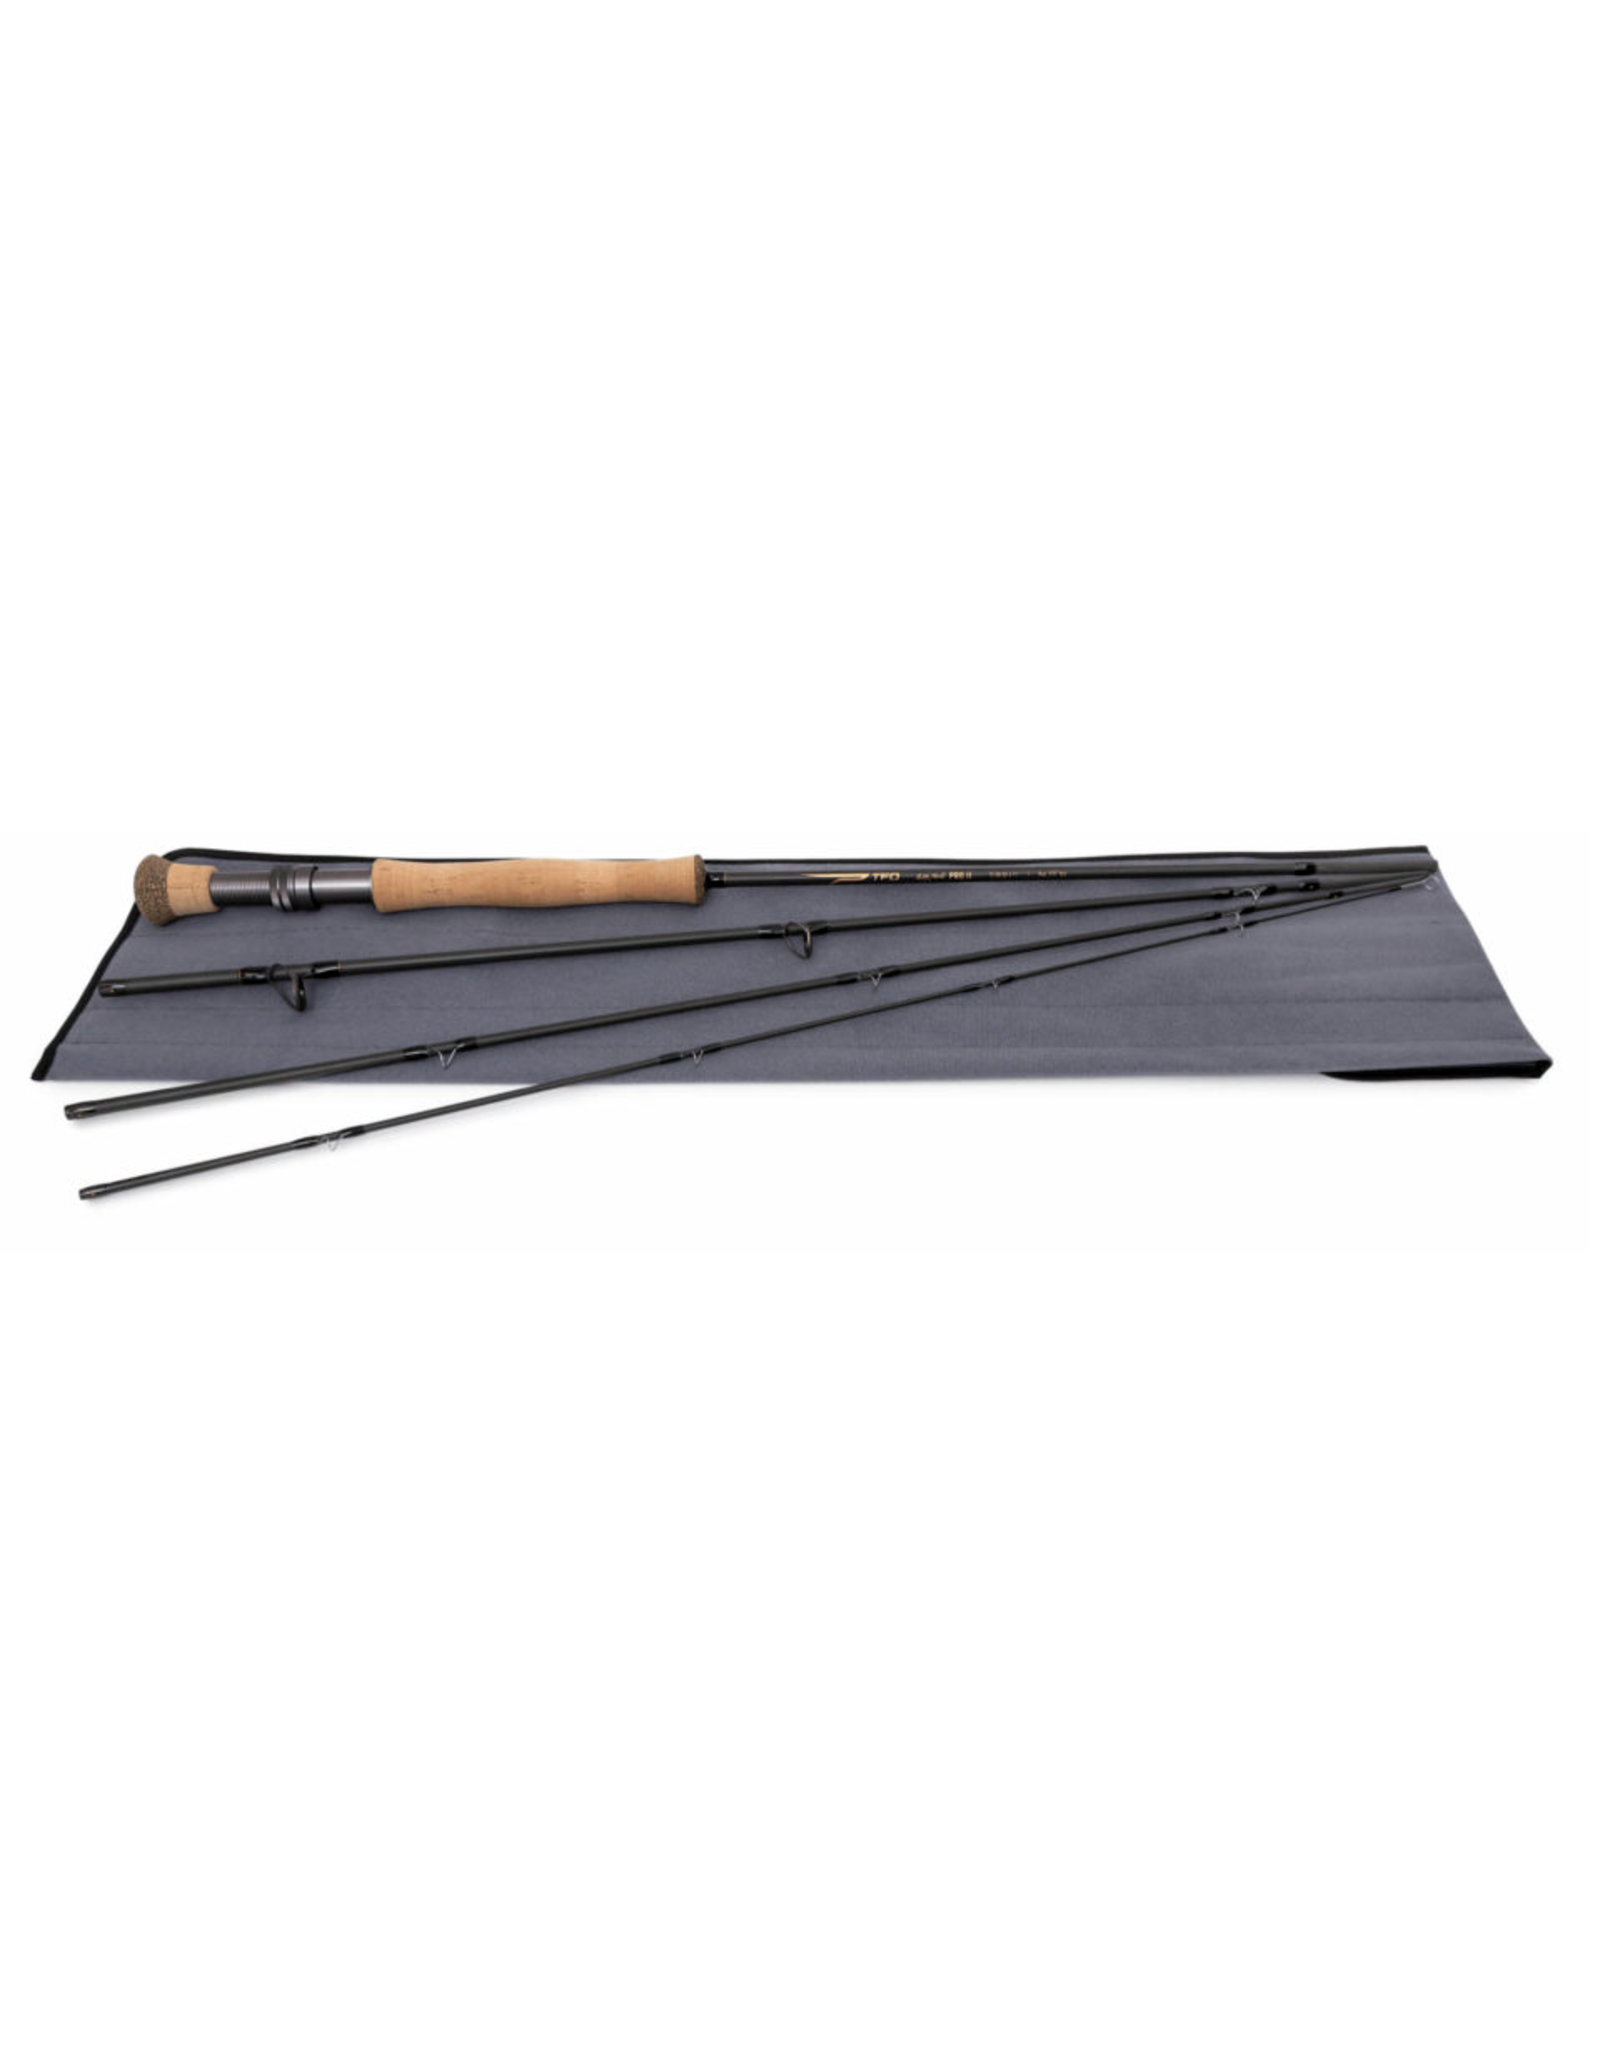 TEMPLE FORK OUTFITTERS TFO PROFESSIONAL 2 FLY ROD W/ CASE